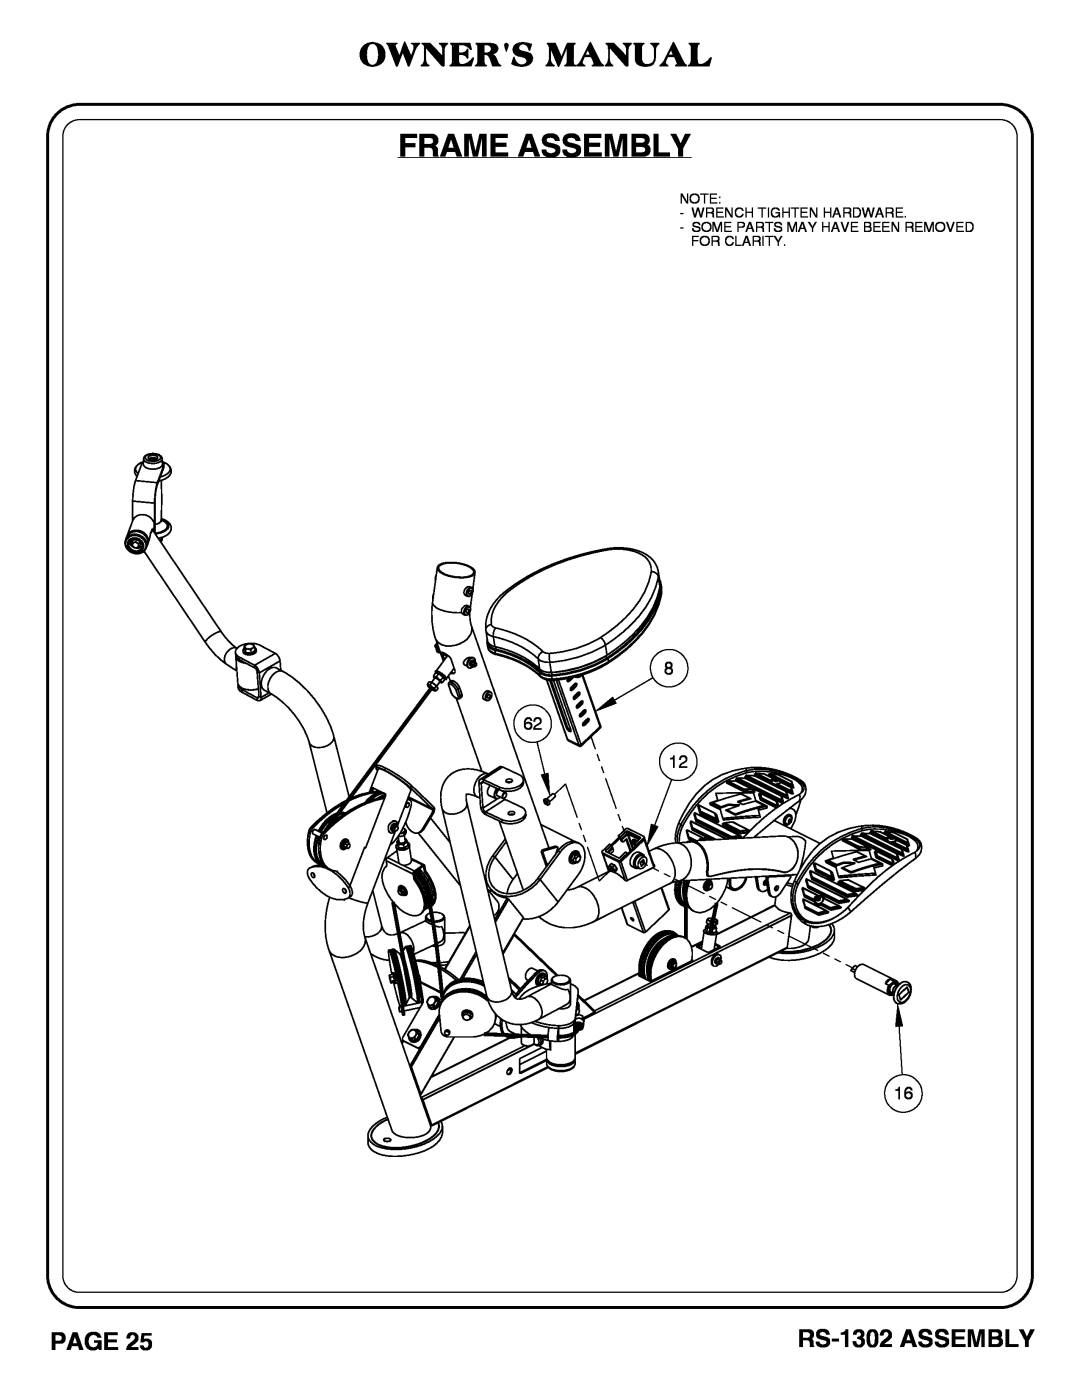 Hoist Fitness owner manual Owners Manual Frame Assembly, Page, RS-1302 ASSEMBLY 